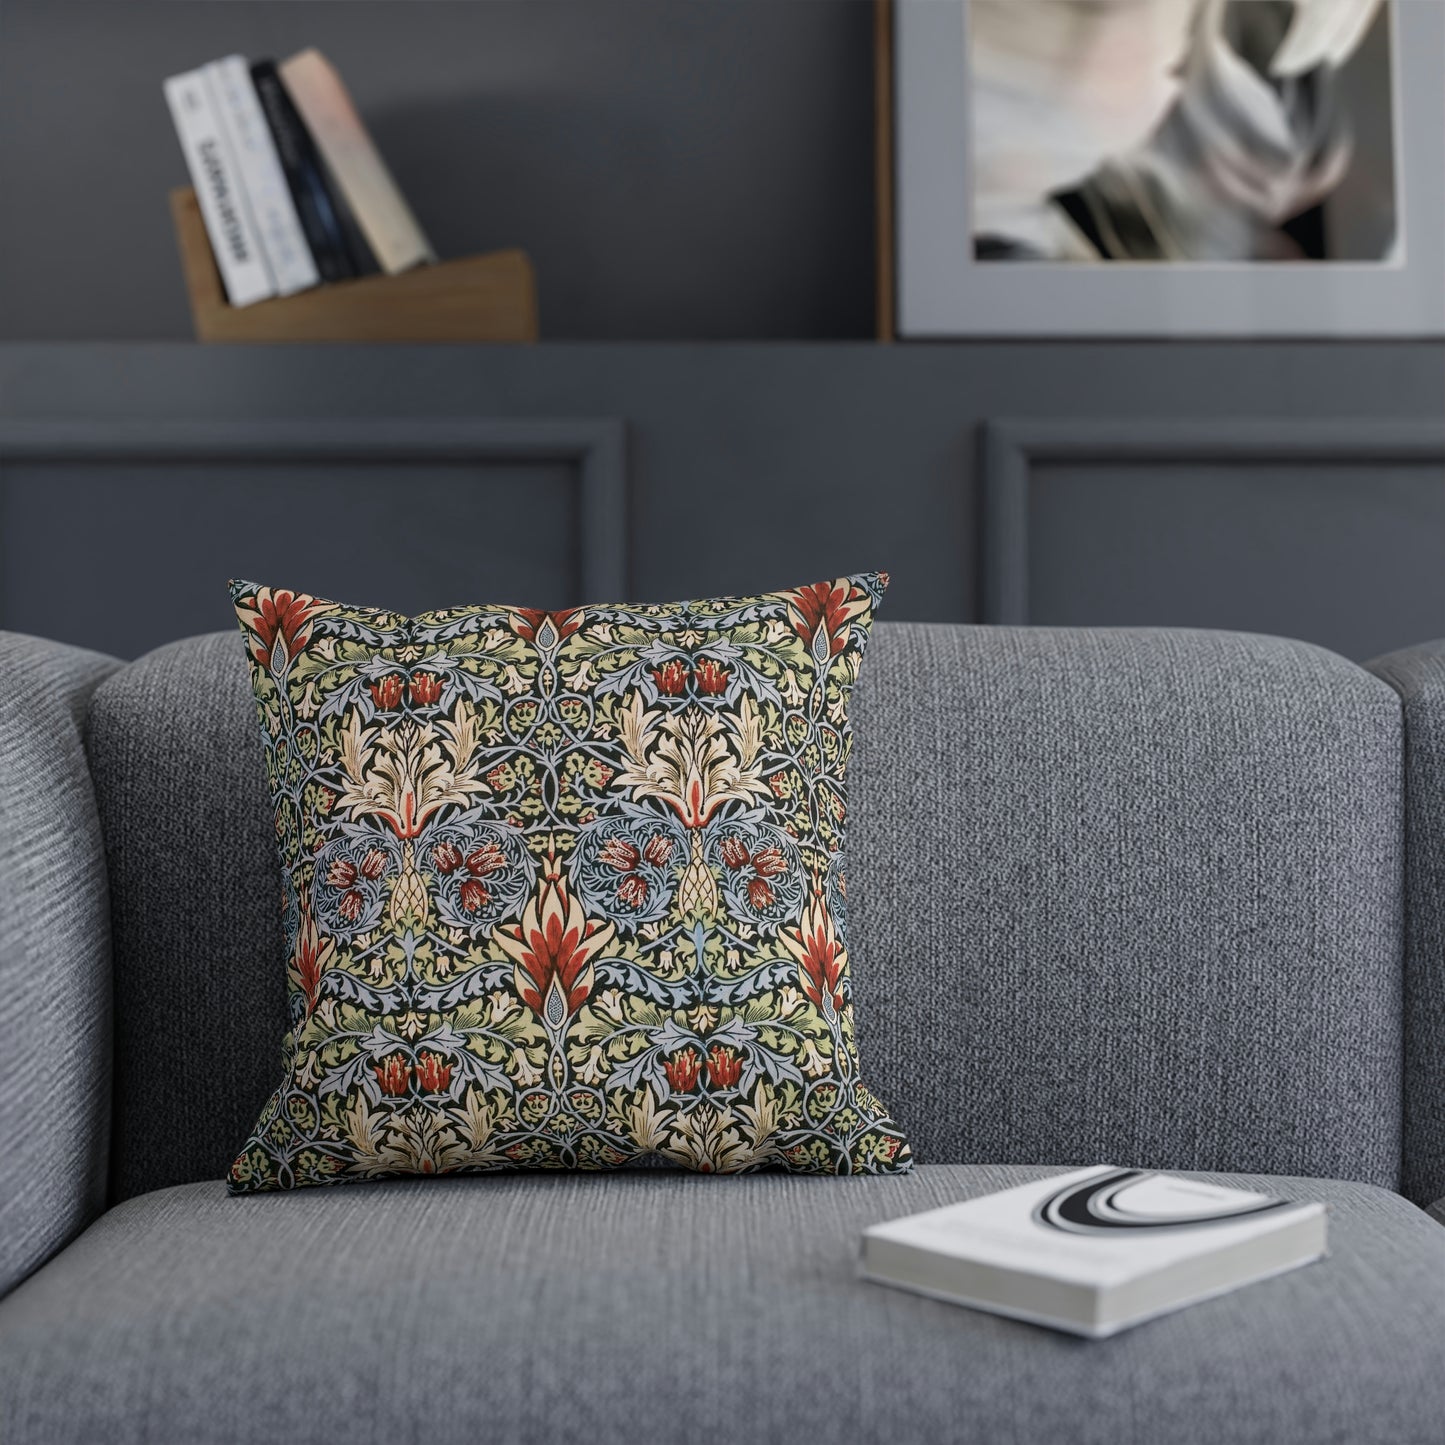 William-Morris-and-Co-Cushion-and-Cushion-Cover-Snakeshead-Collection-3